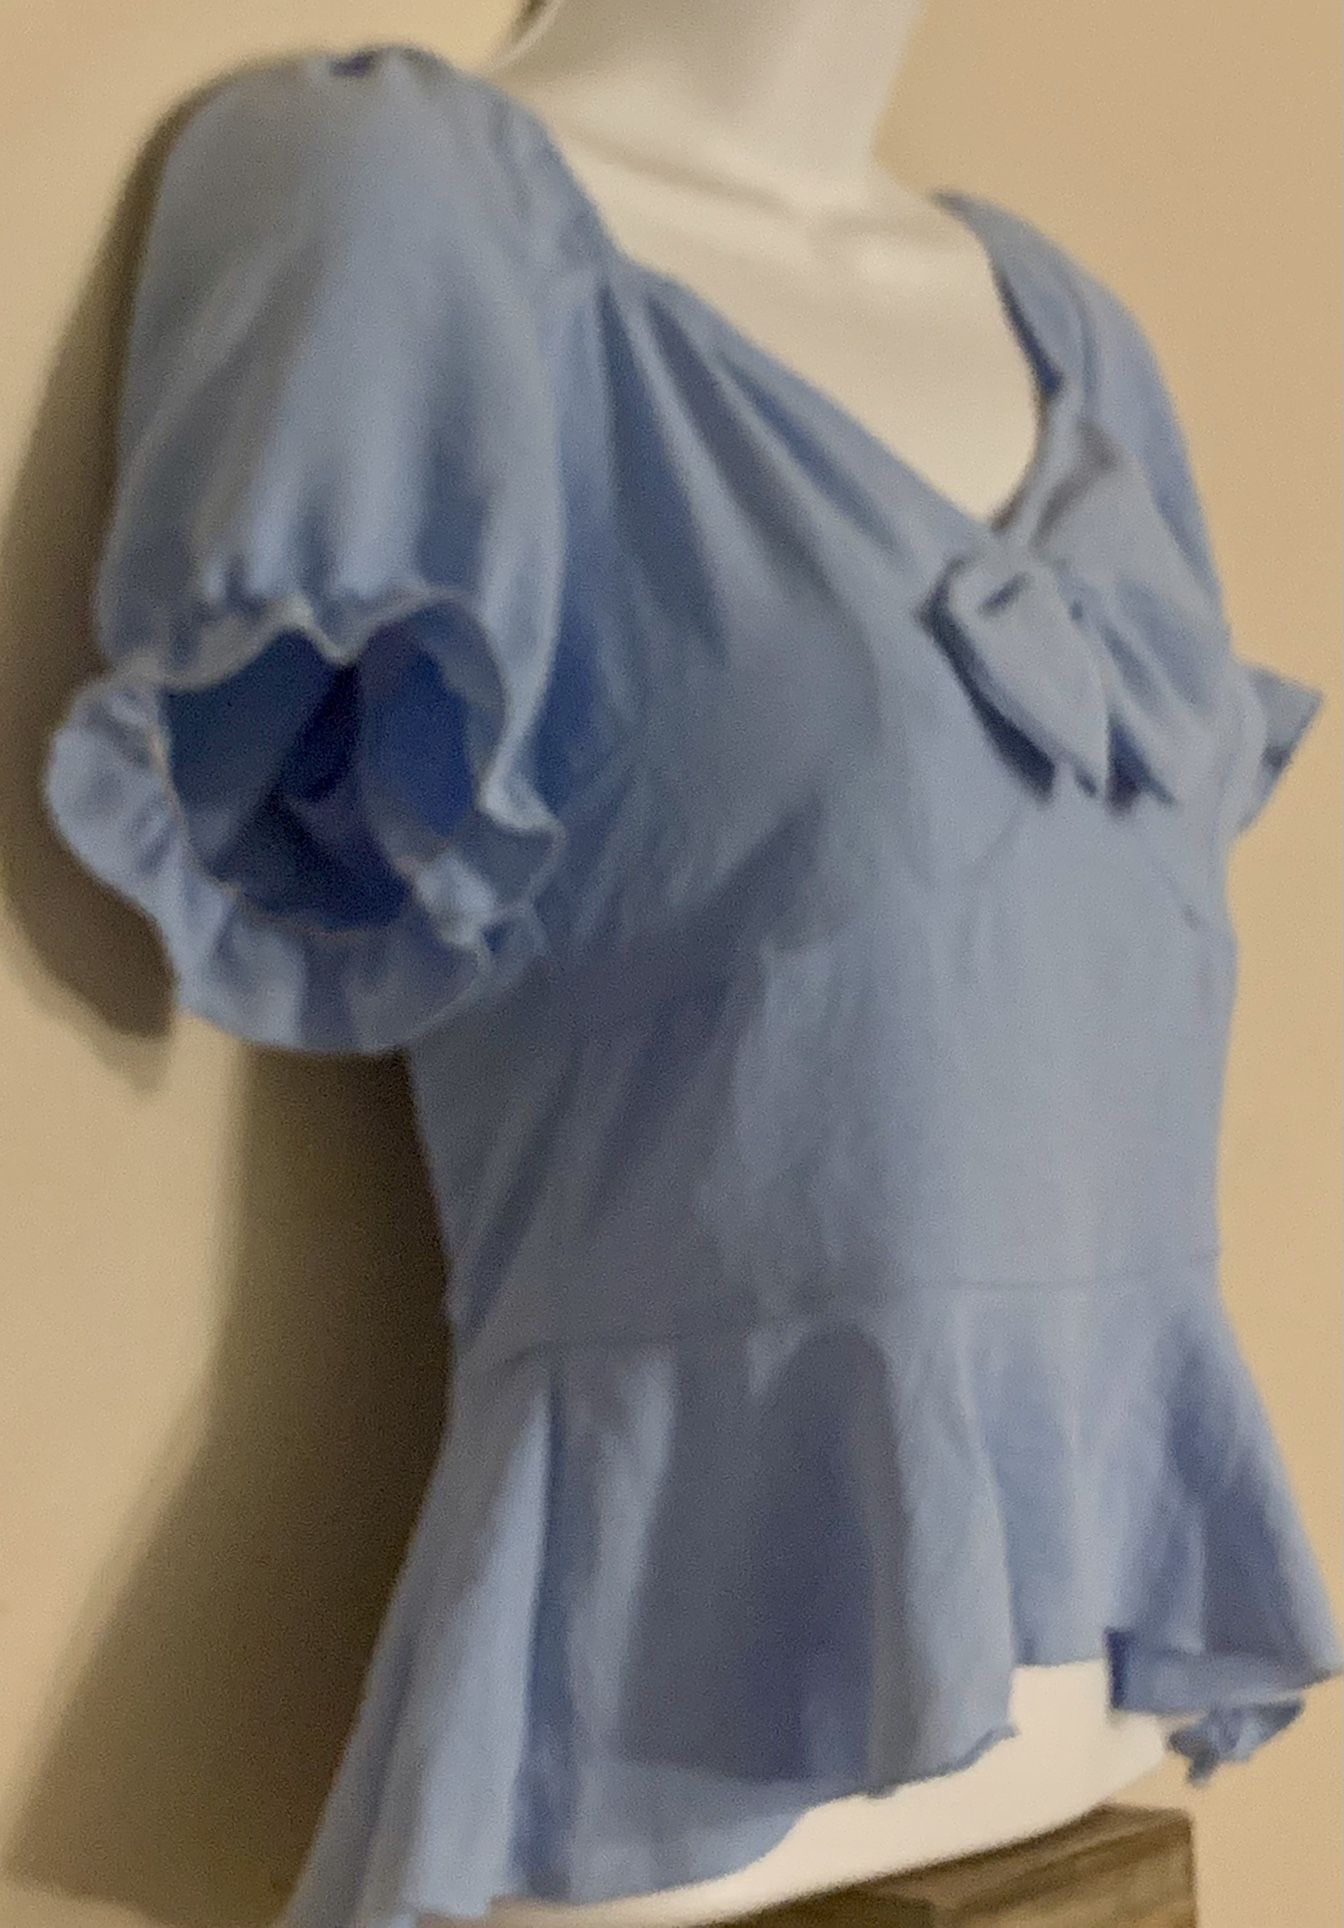 BRAND NEW CUTE WOMAN’S TOP, BLUE, Size small, Brand: SBetro, Never Worn